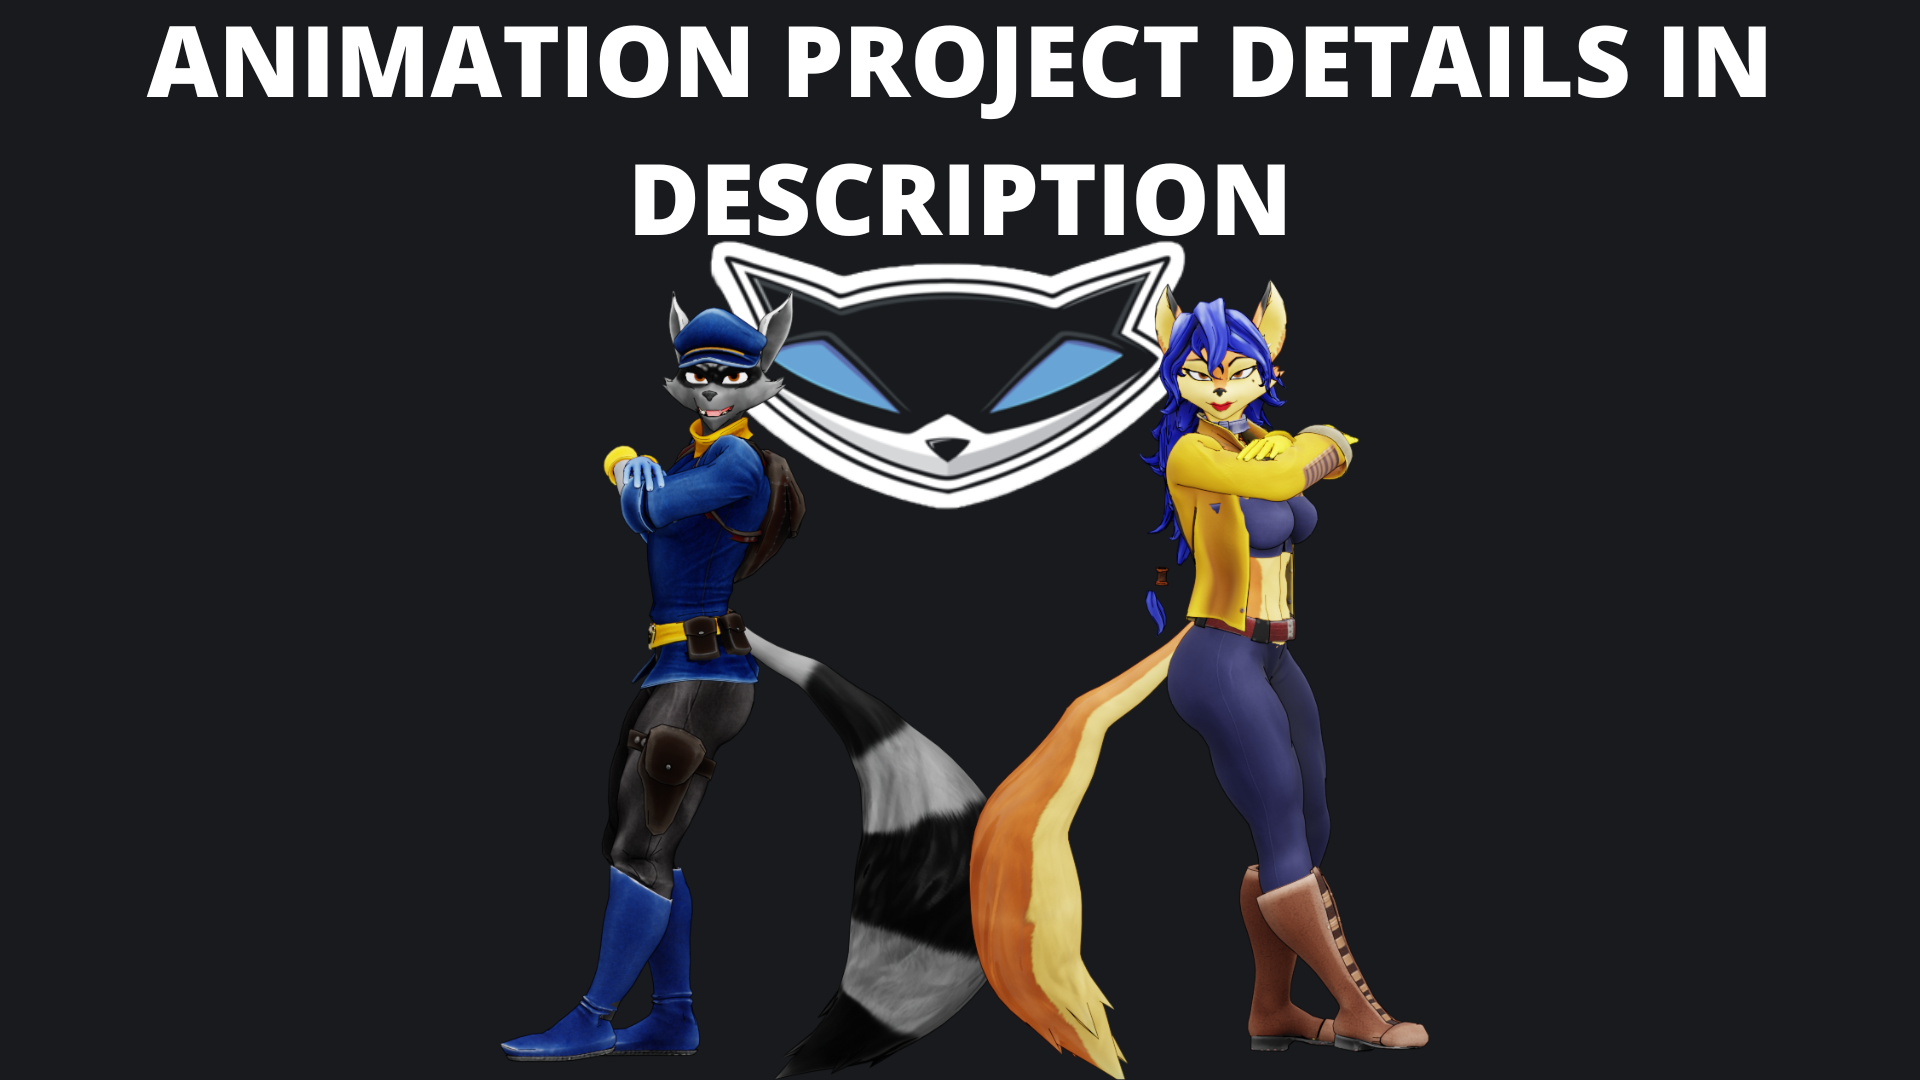 Sly Cooper 5 Imagined Part 3 - Introduction/Tutorial 